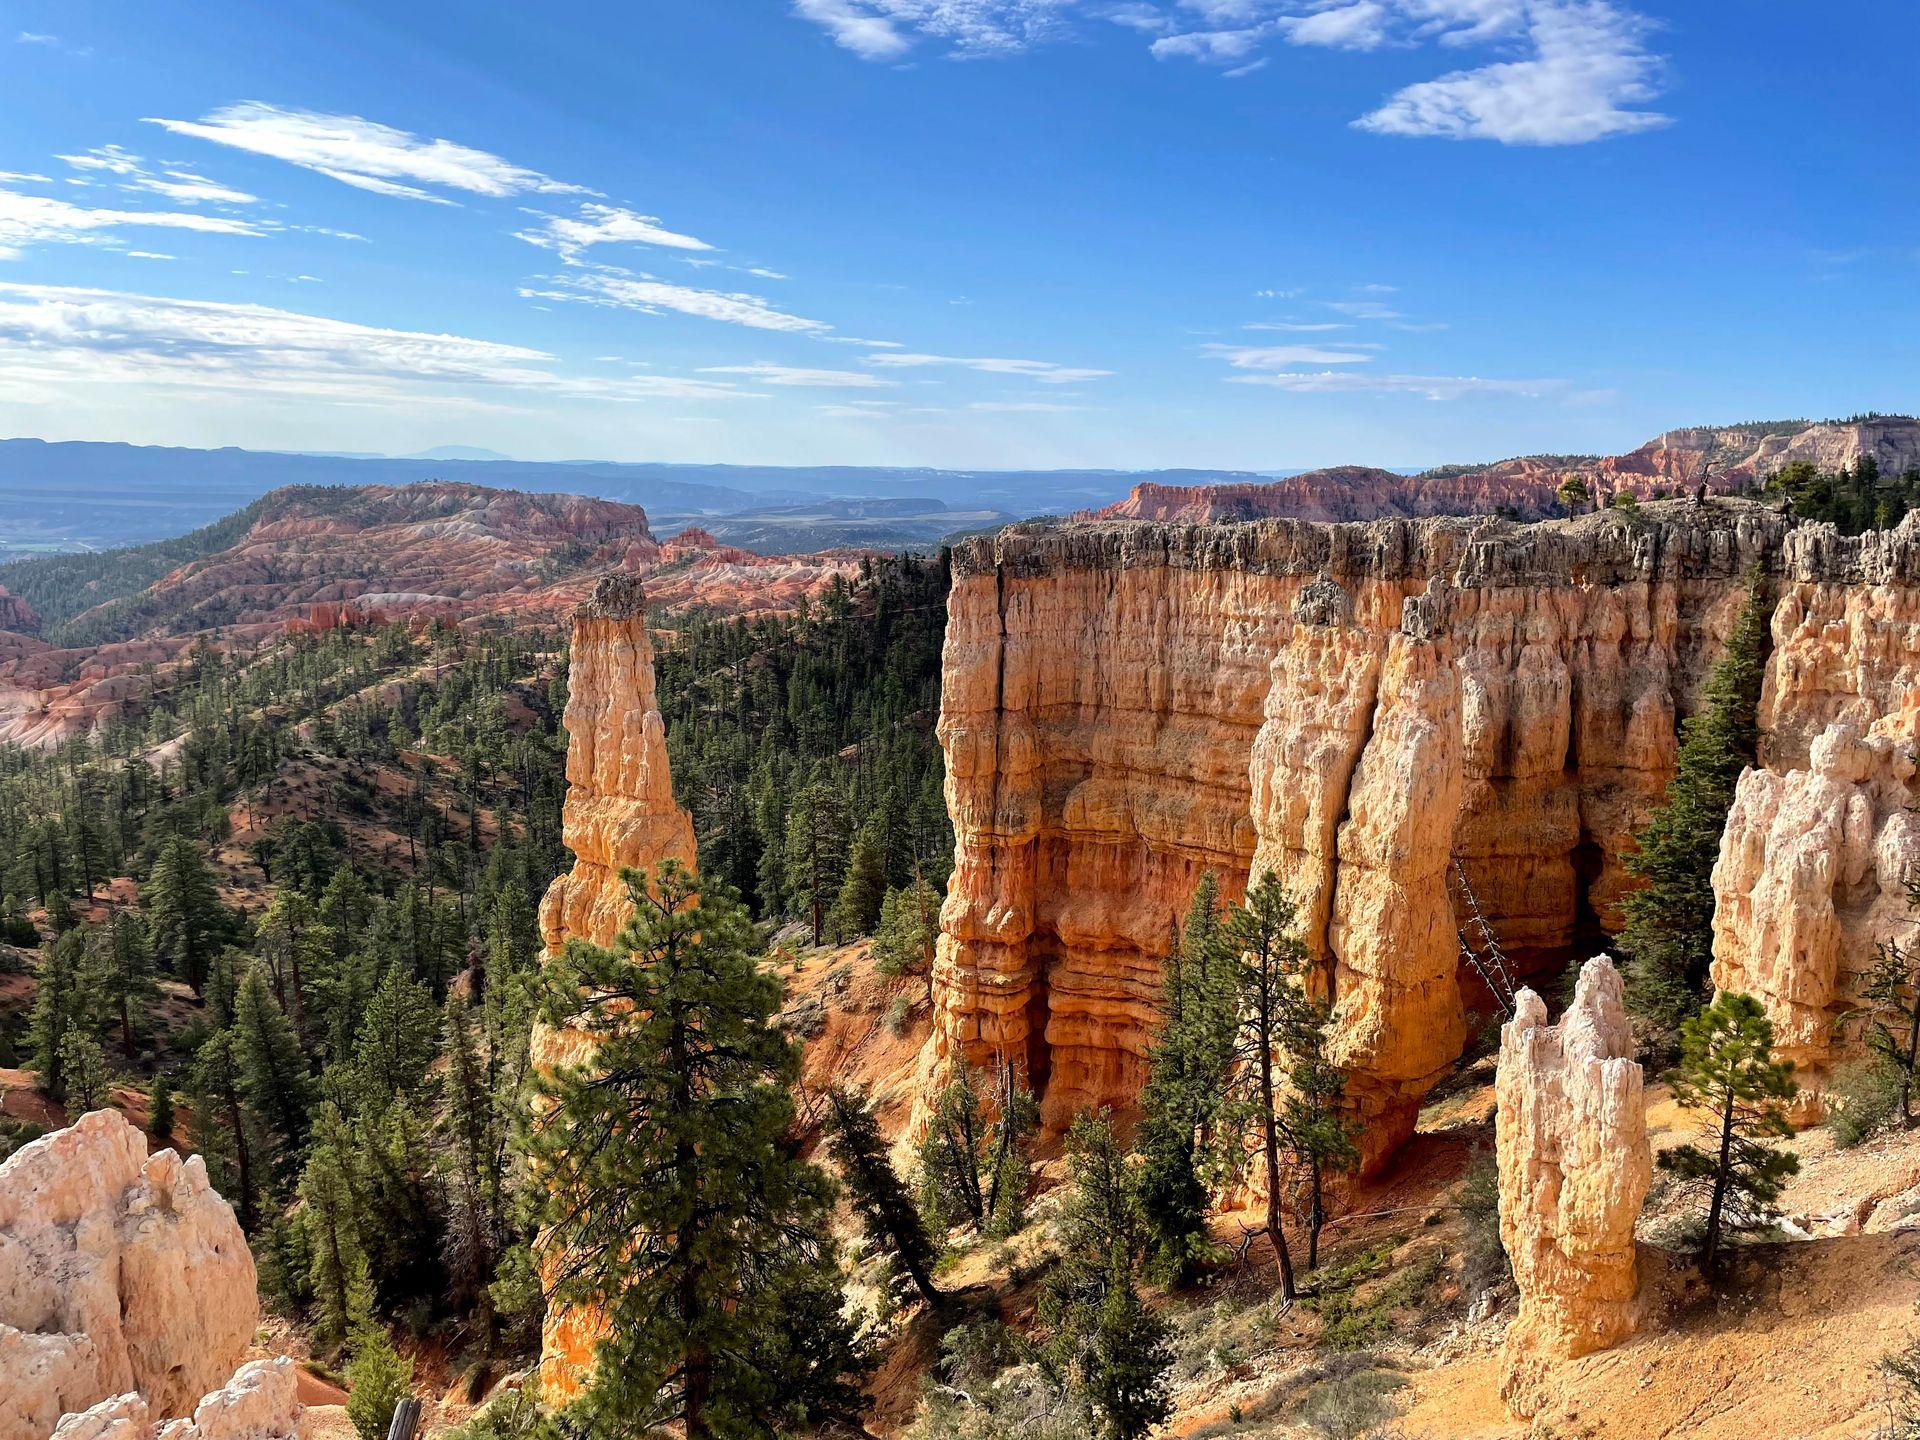 A view from the Fairyland Loop trail of orange hoodoos with green trees nearby. One hoodoo seems to stand alone.